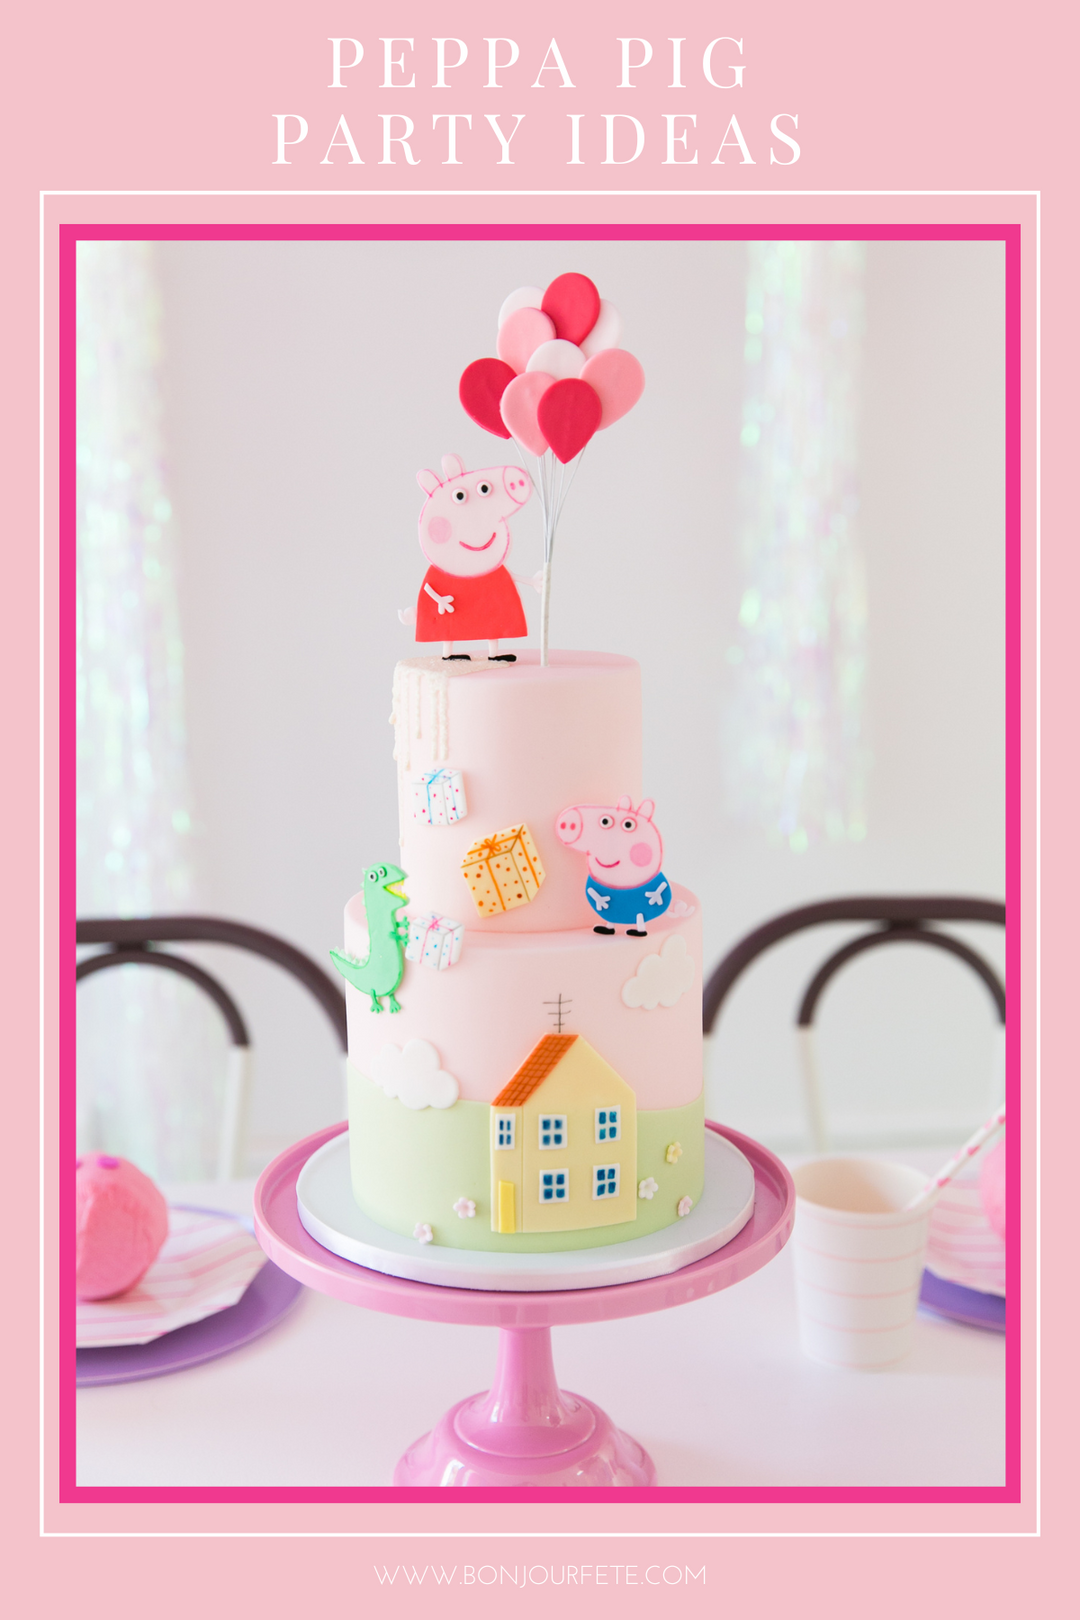 HOW TO THROW A PEPPA PIG PARTY THAT'S PERFECT